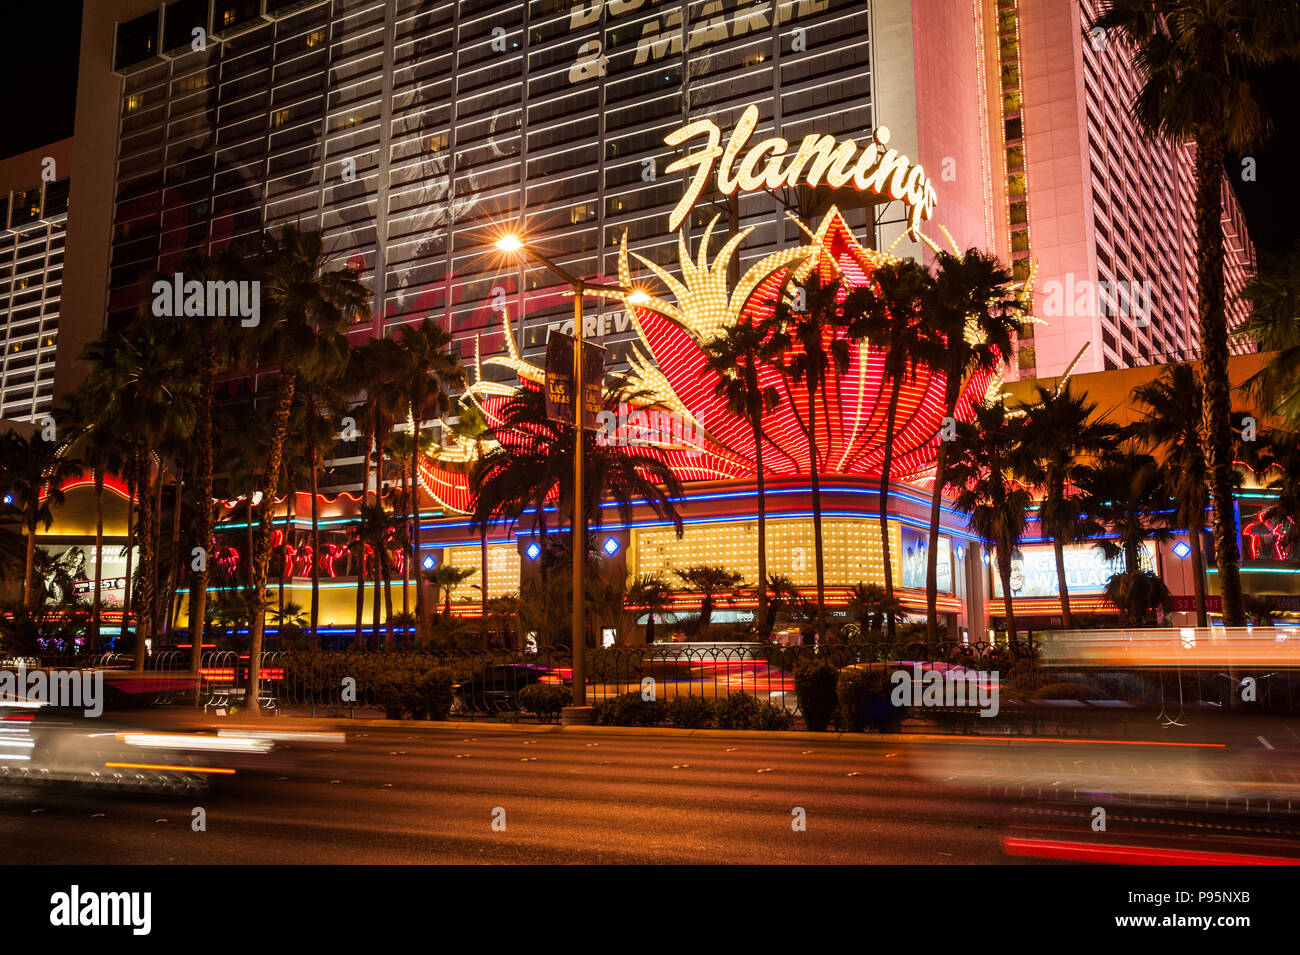 Las Vegas, Nevada, United States - May 27, 2013: Night exposure of the neon sign above the entrance to the landmark Flamingo Hotel and Casino. Stock Photo